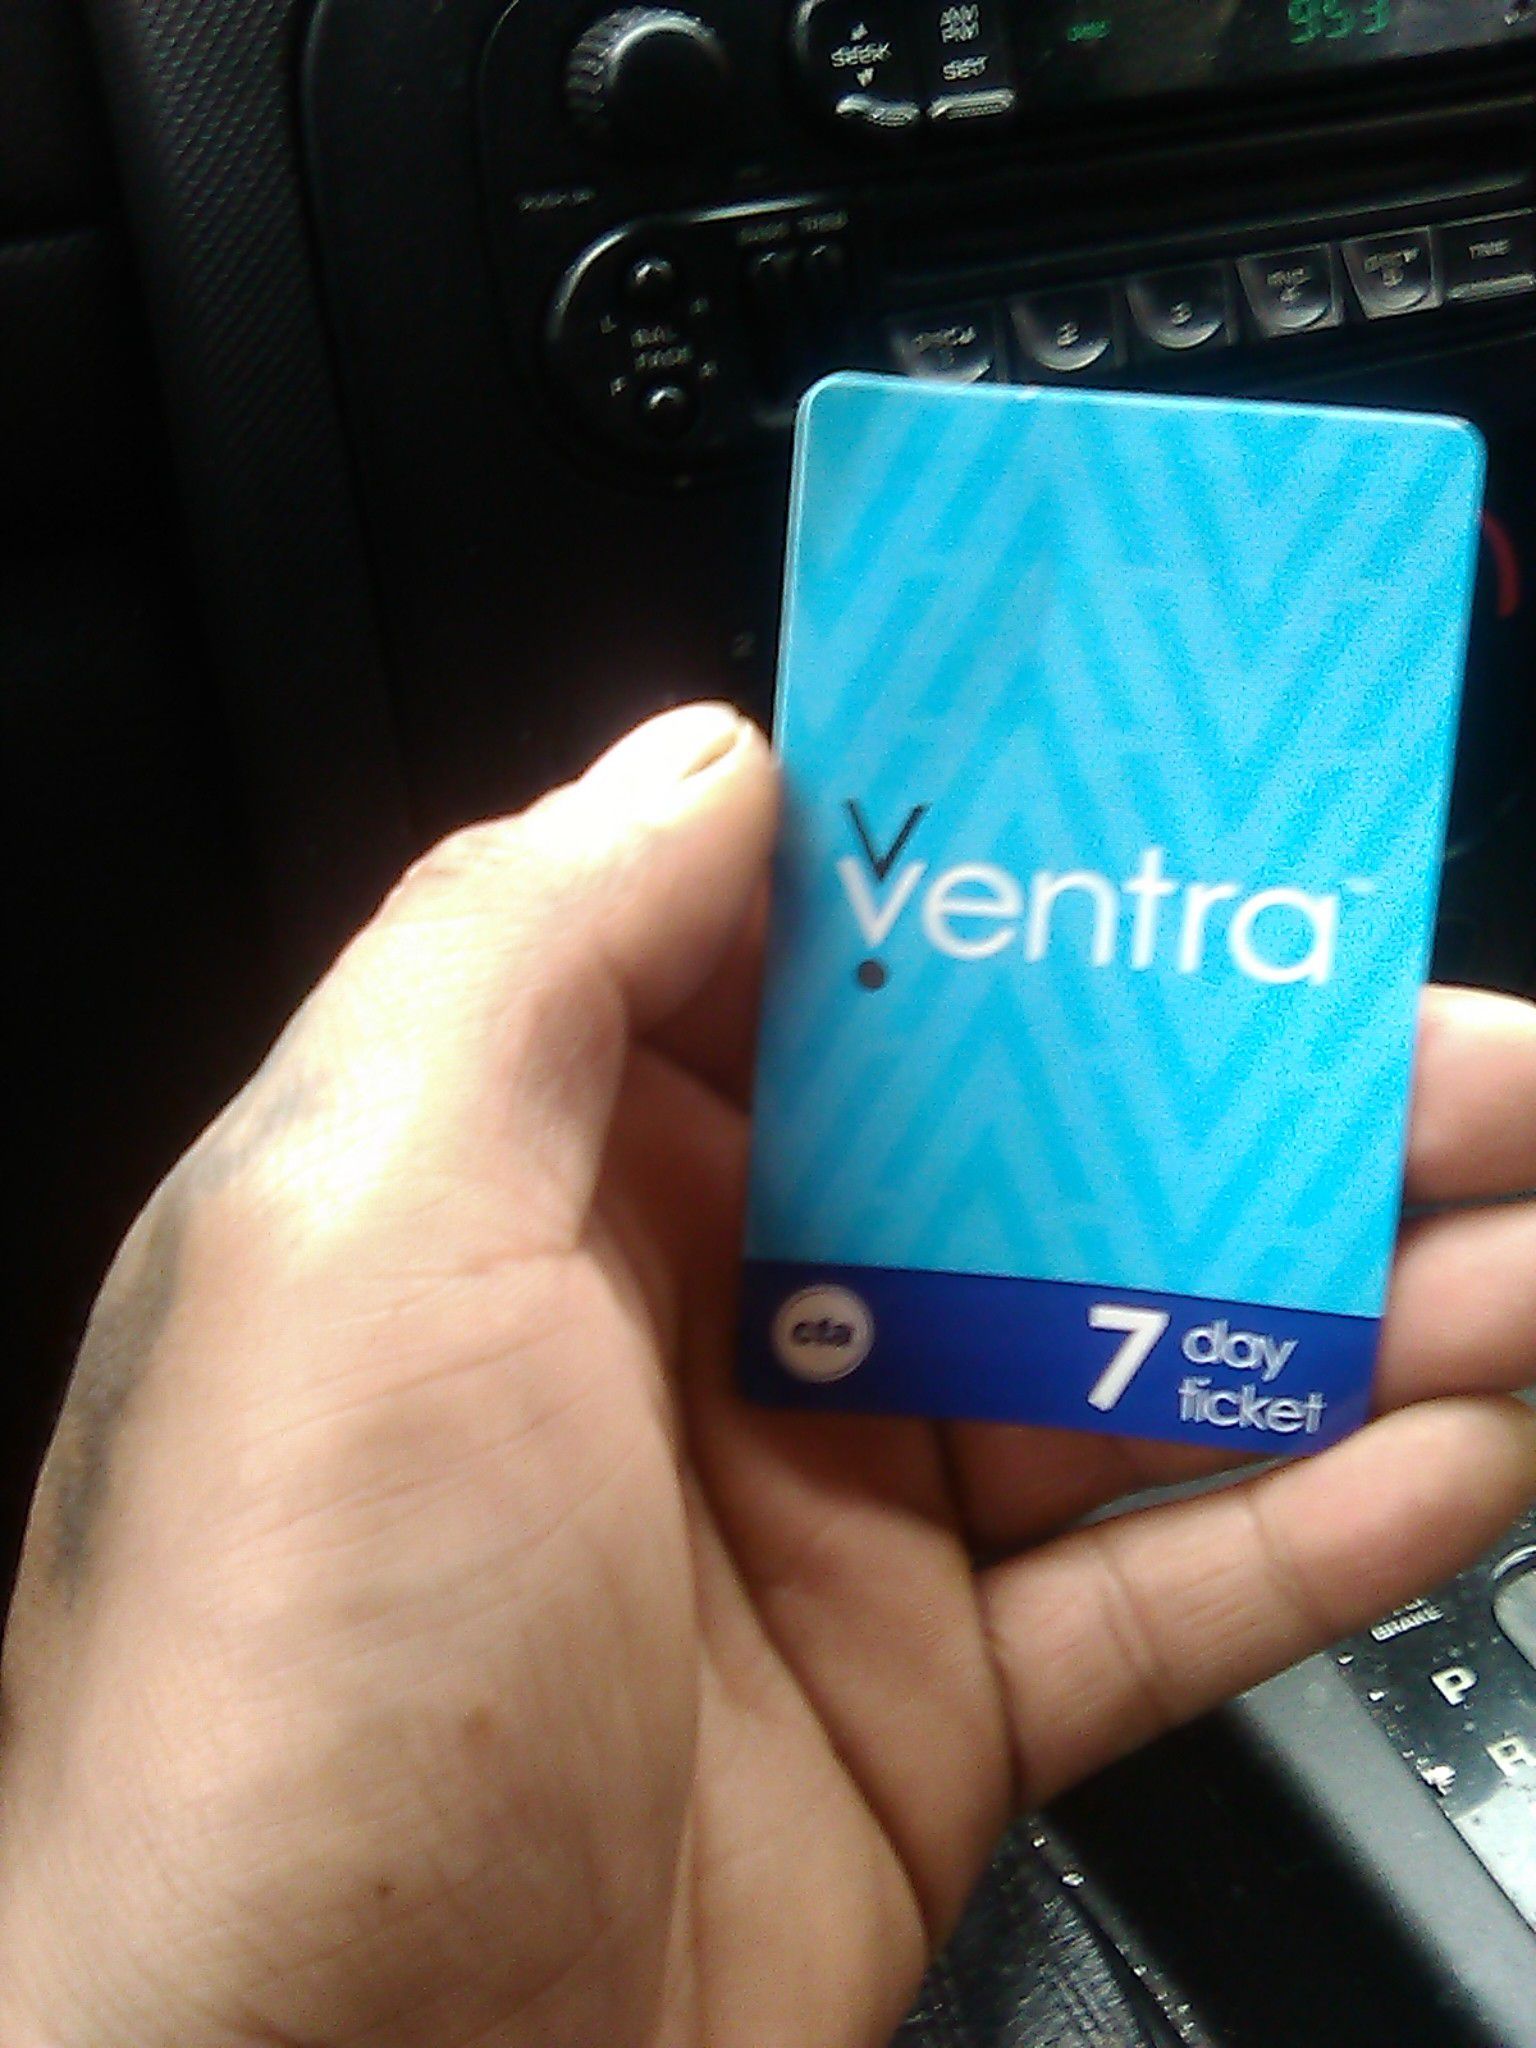 Ventra 7day unlimited rides